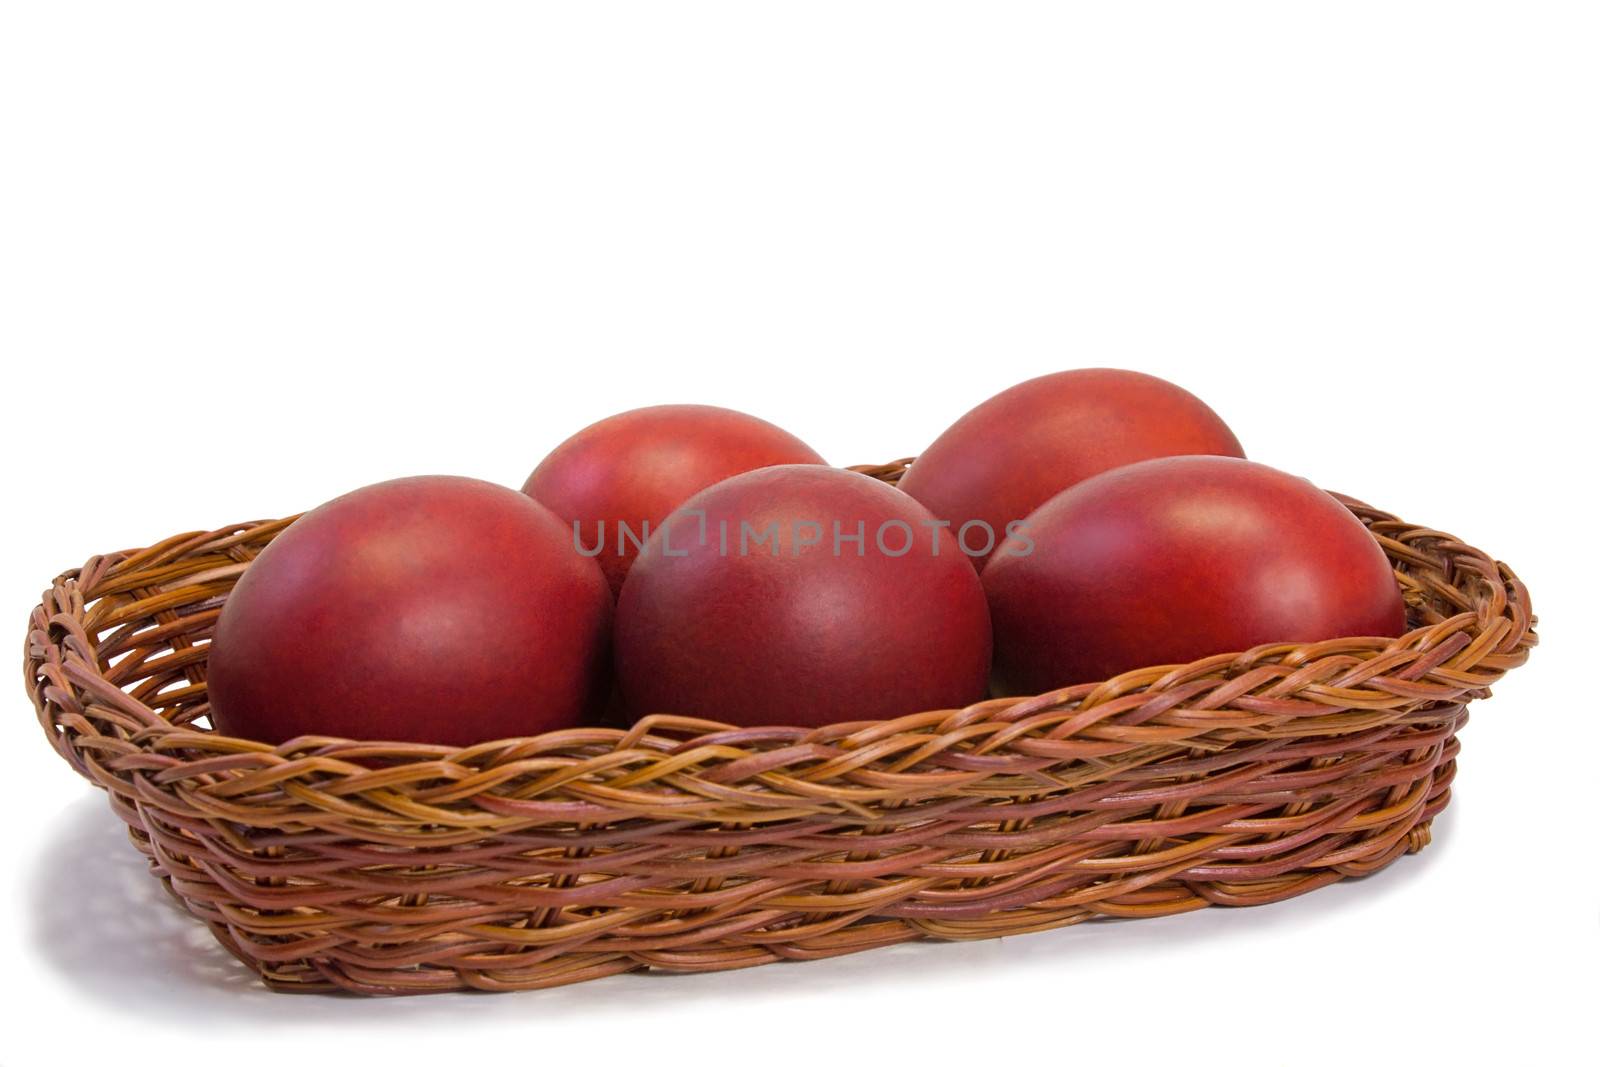 Red Easter eggs in a basket on a white background. by georgina198